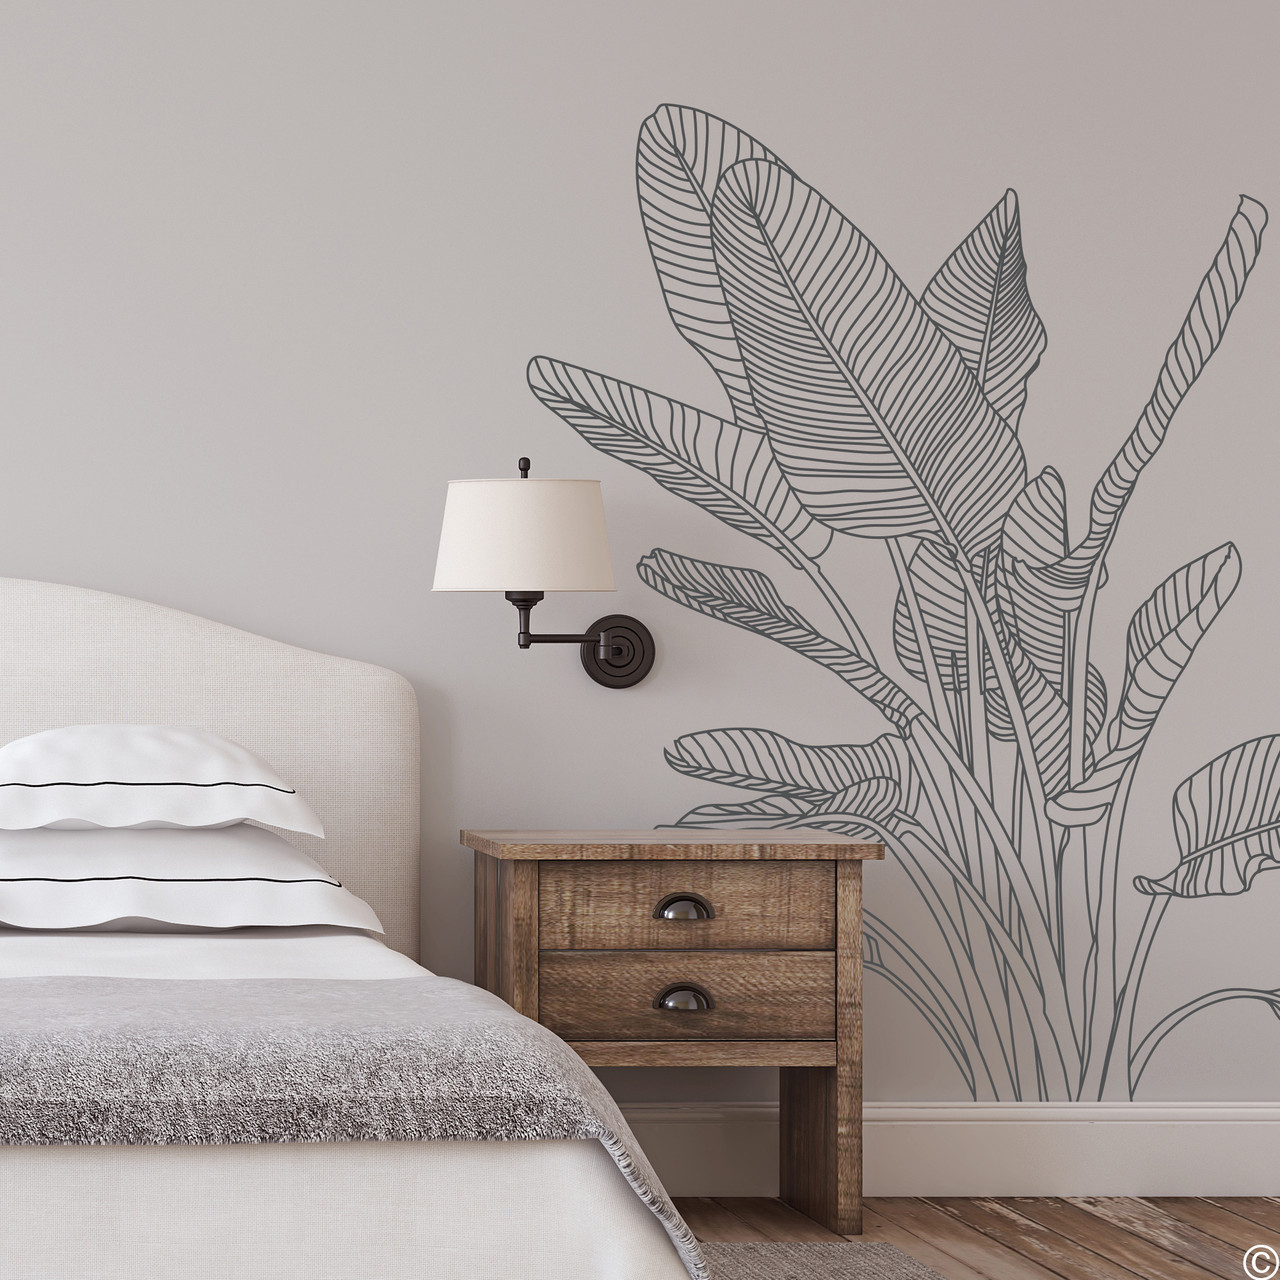 The Bird of Paradise wall decal art shown here in dark grey vinyl color.